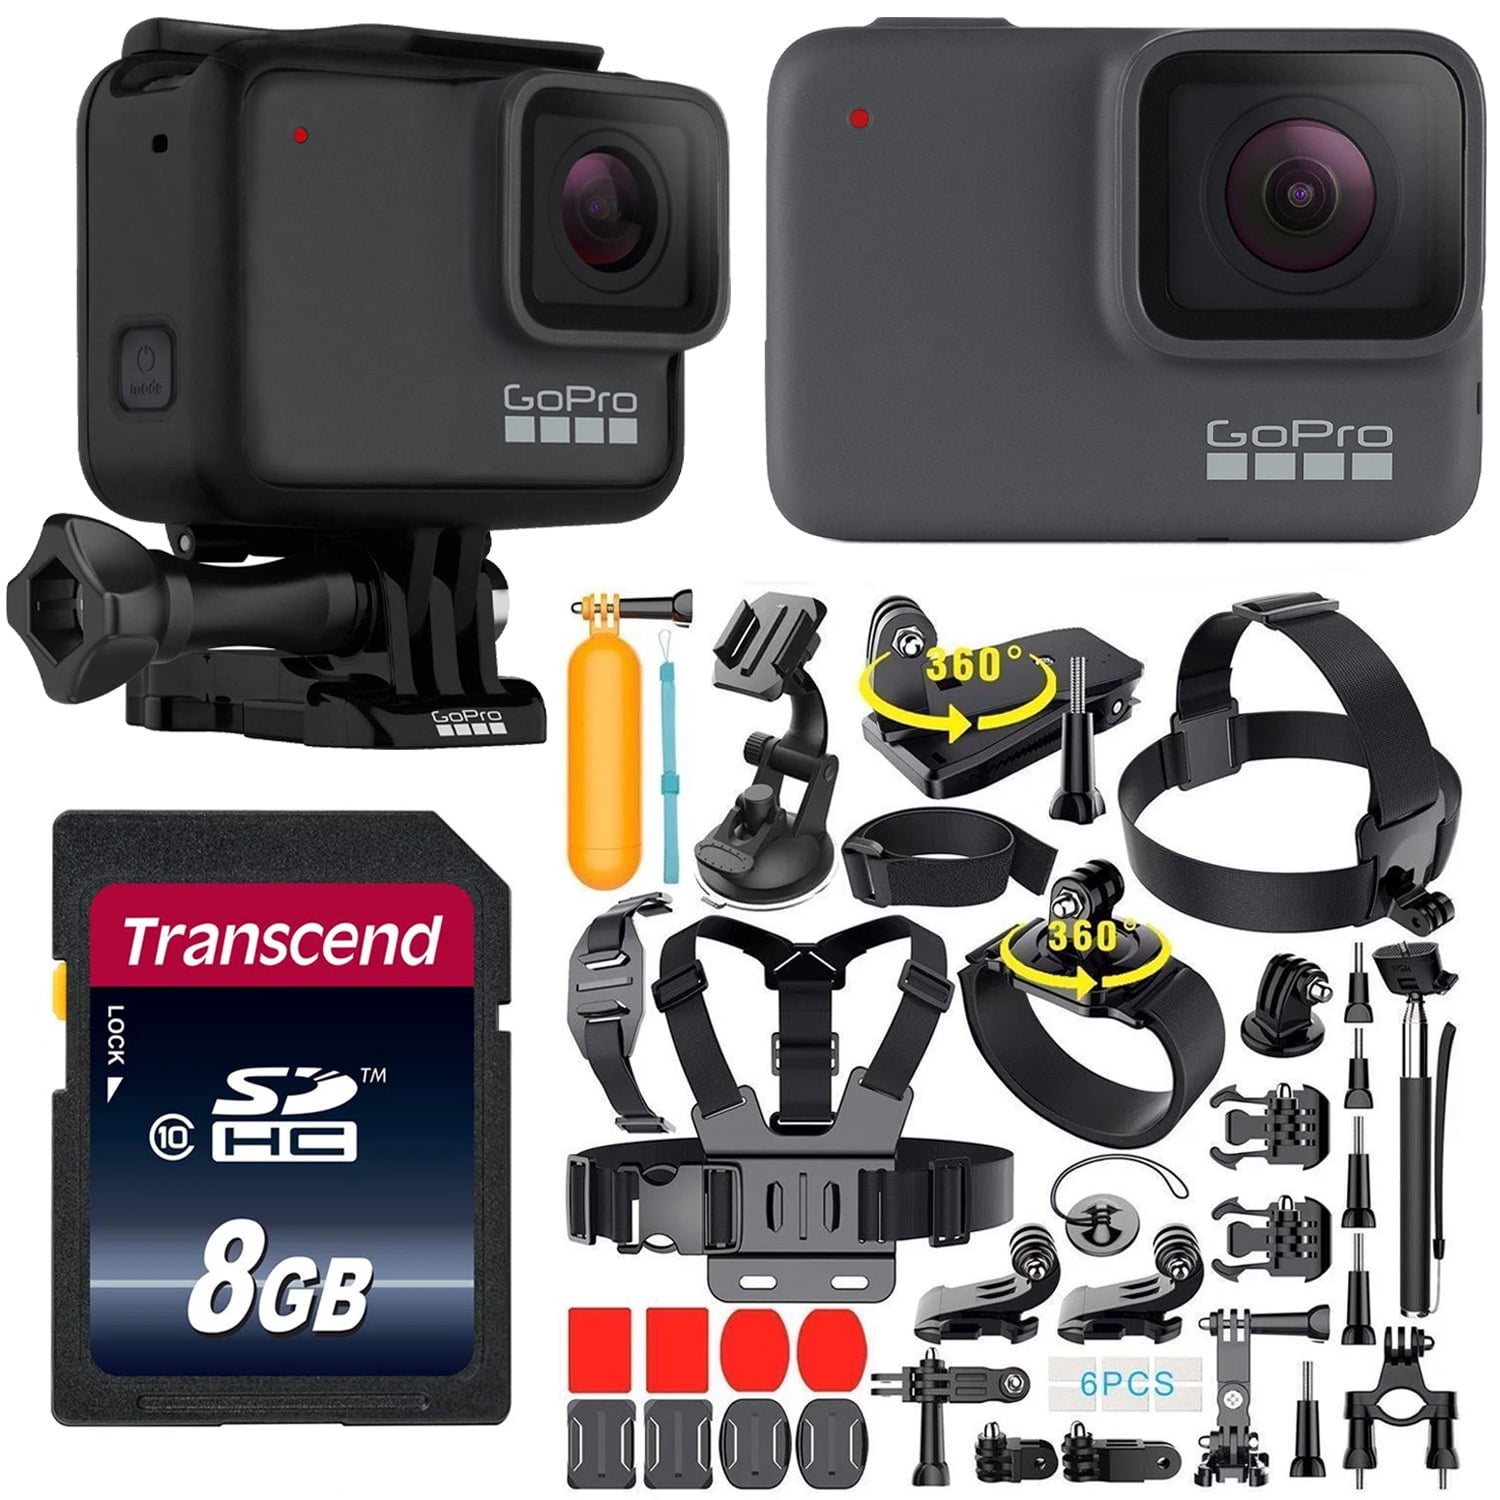 GoPro Camera HERO7, Silver E-Commerce Package - With Accessories Kit (Refurbished) Walmart.com